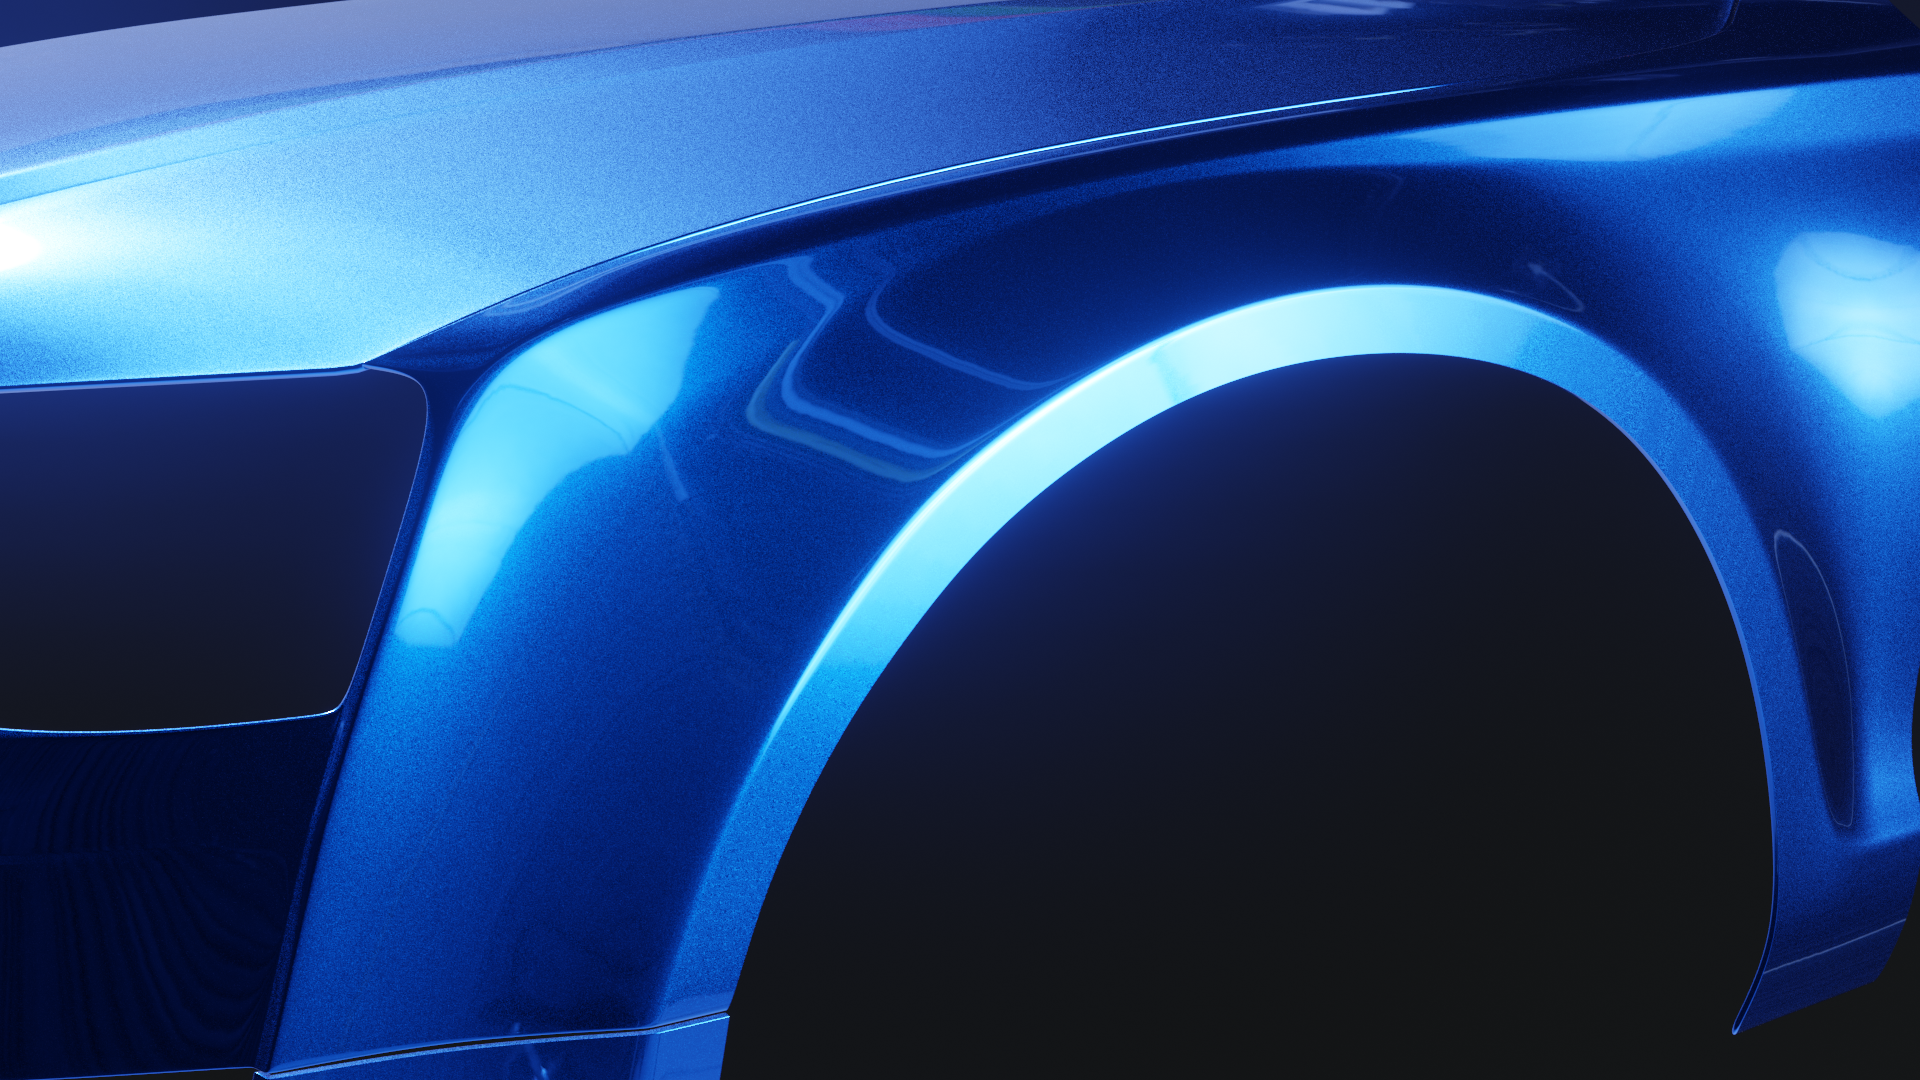 Awesome Metallic Car Paint Shader preview image 1